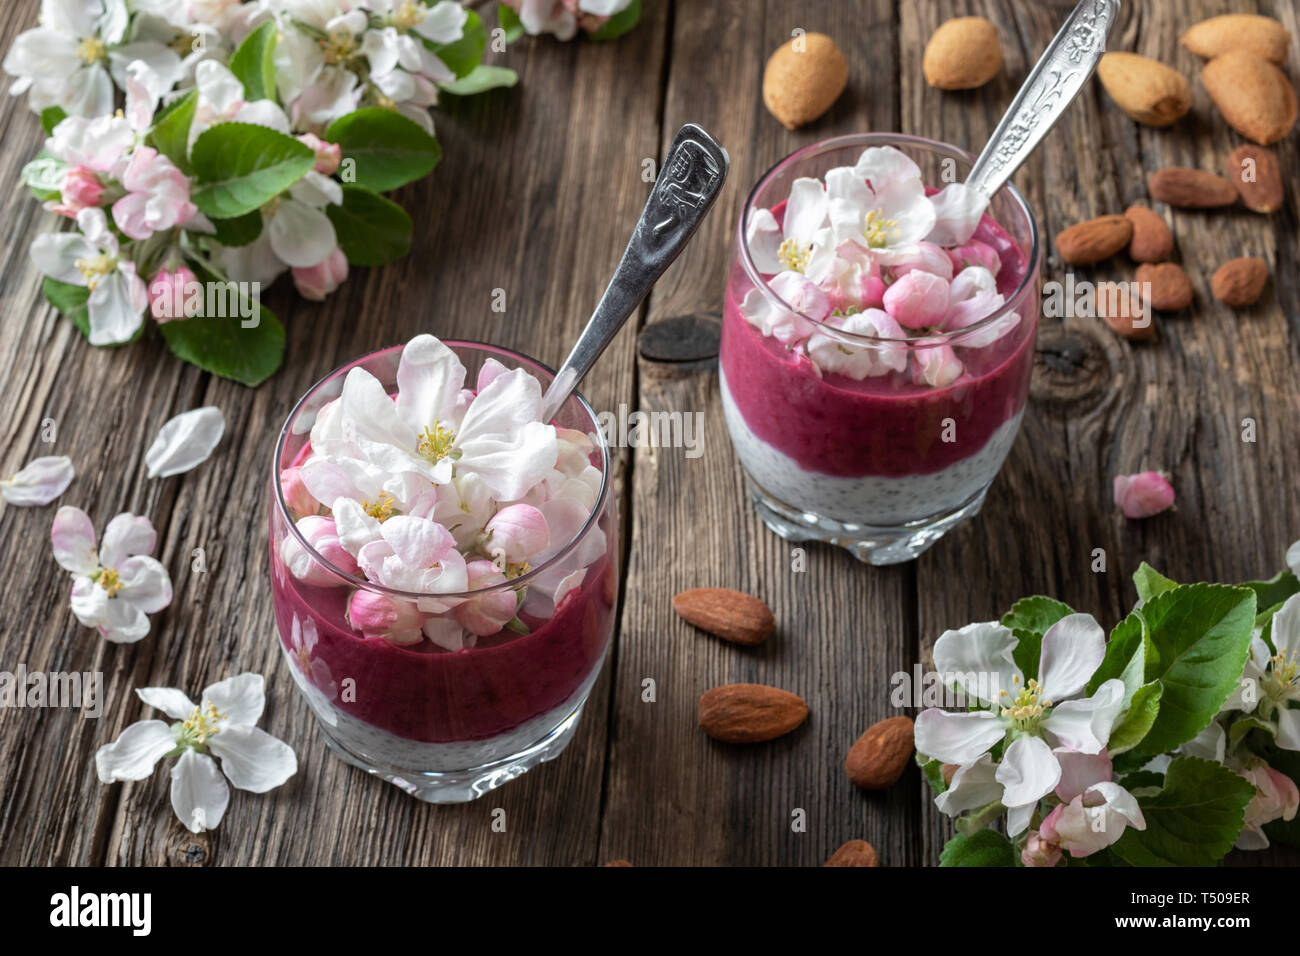 Layered chia pudding with almond milk, yogurt, blueberries and apple blossoms Stock Photo